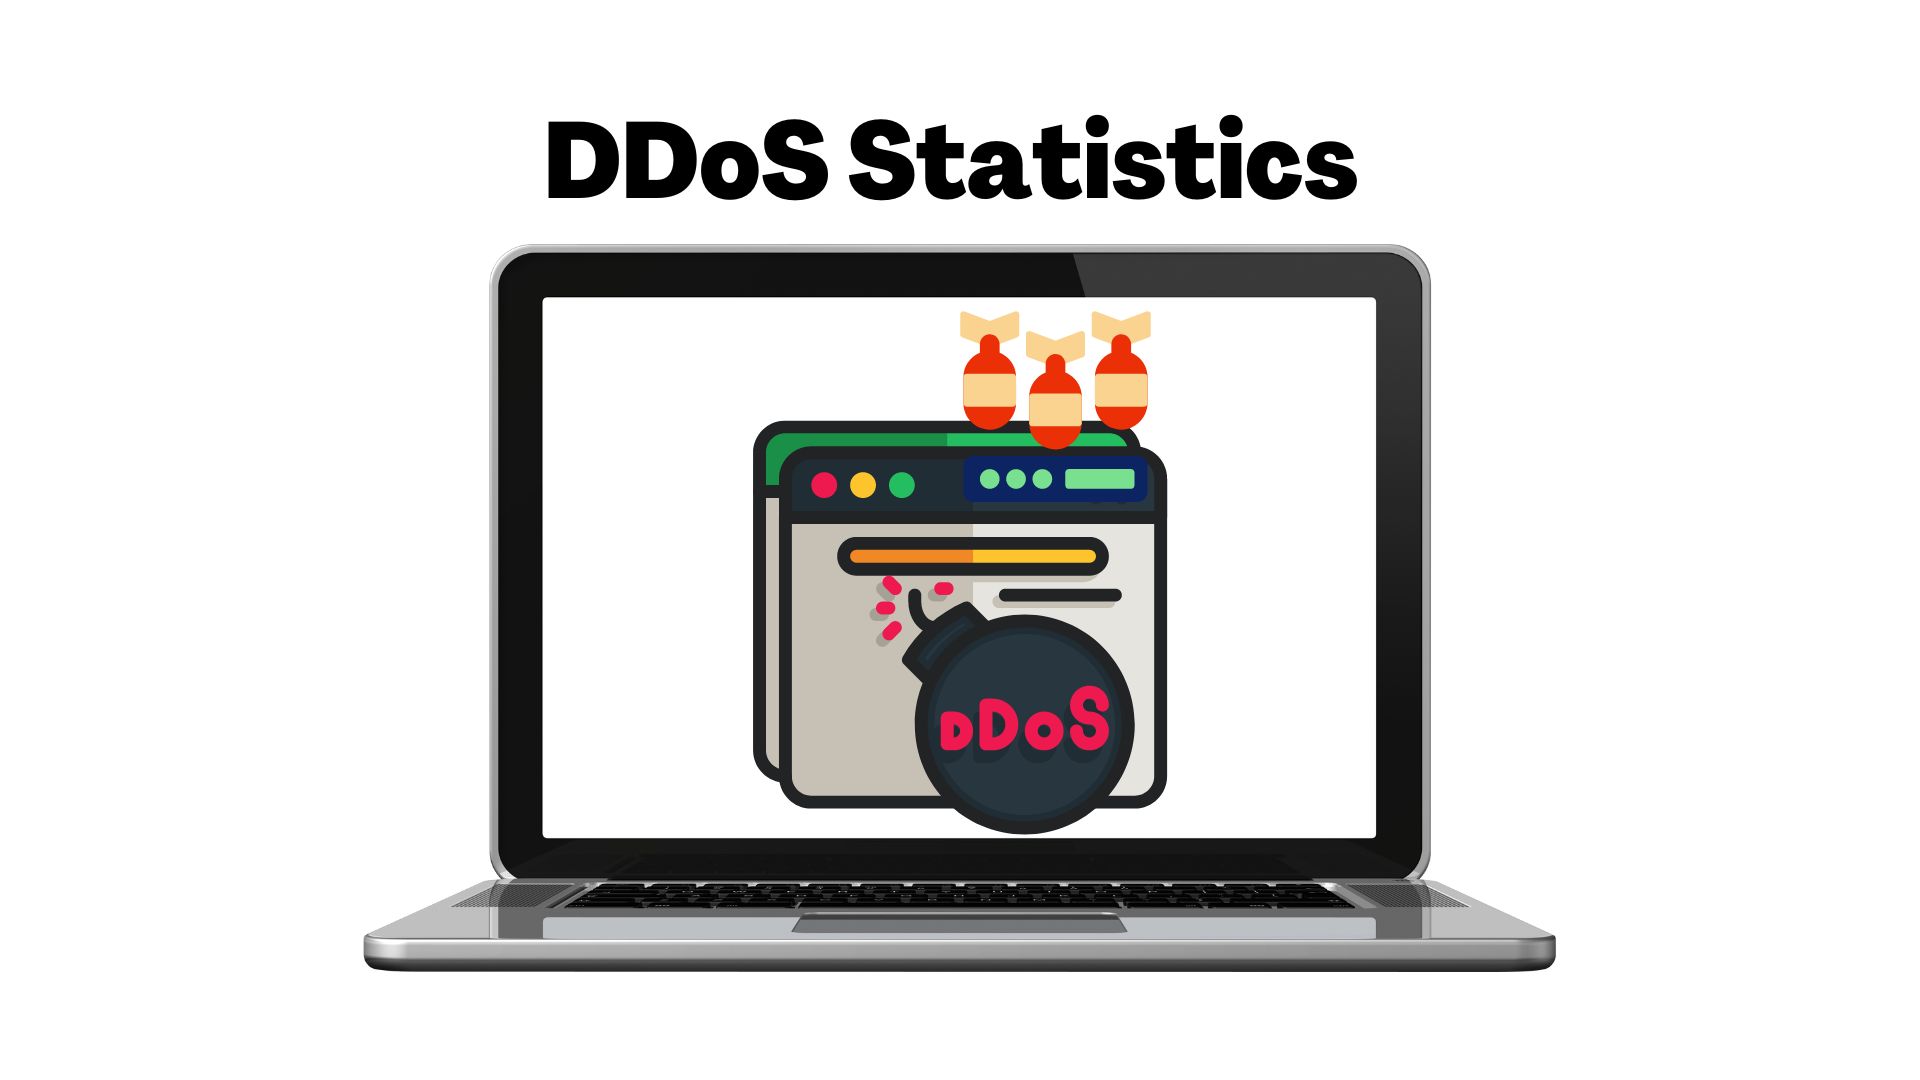 A List Of Notable DDoS Statistics To Understand The Cyber Threat In The Upcoming Years